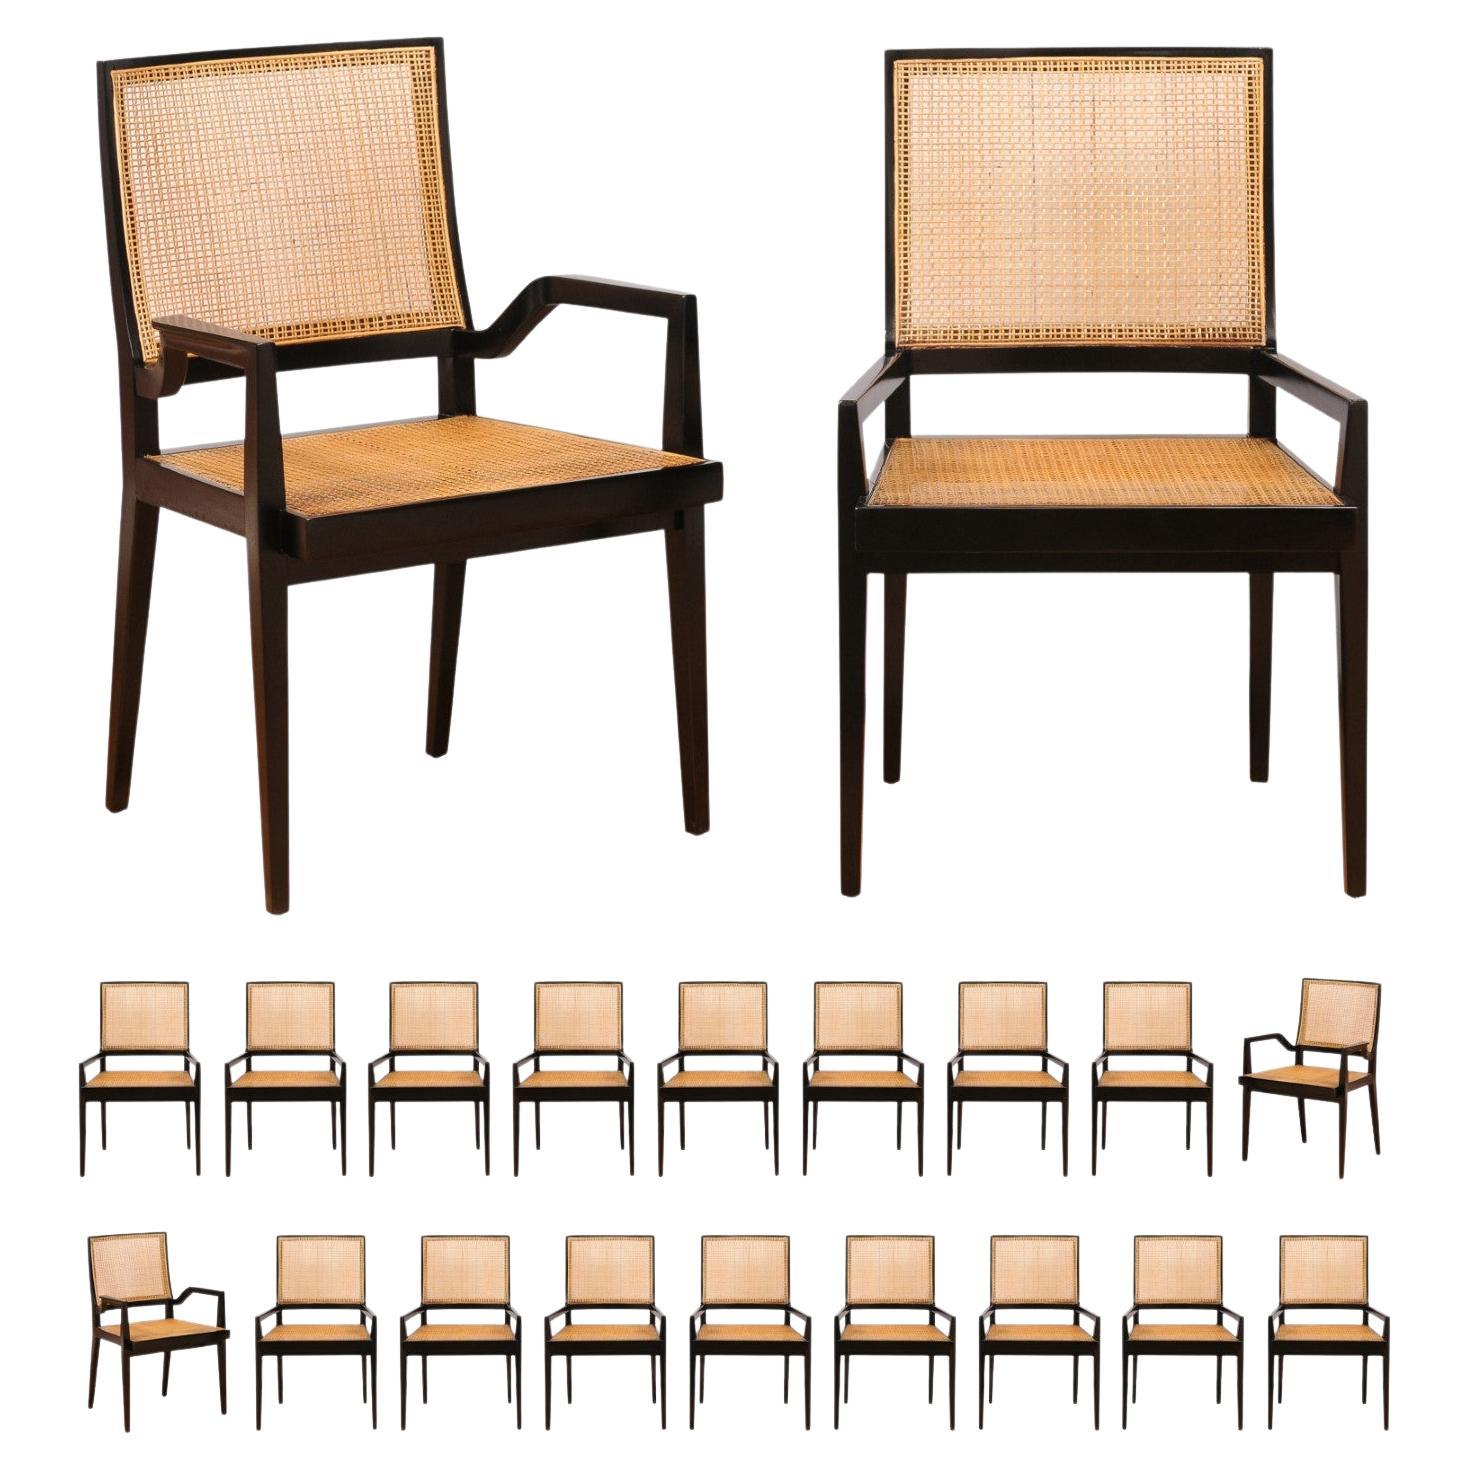 Spectacular Set of 20 Sleek Double Cane Dining Chairs by Michael Taylor For Sale